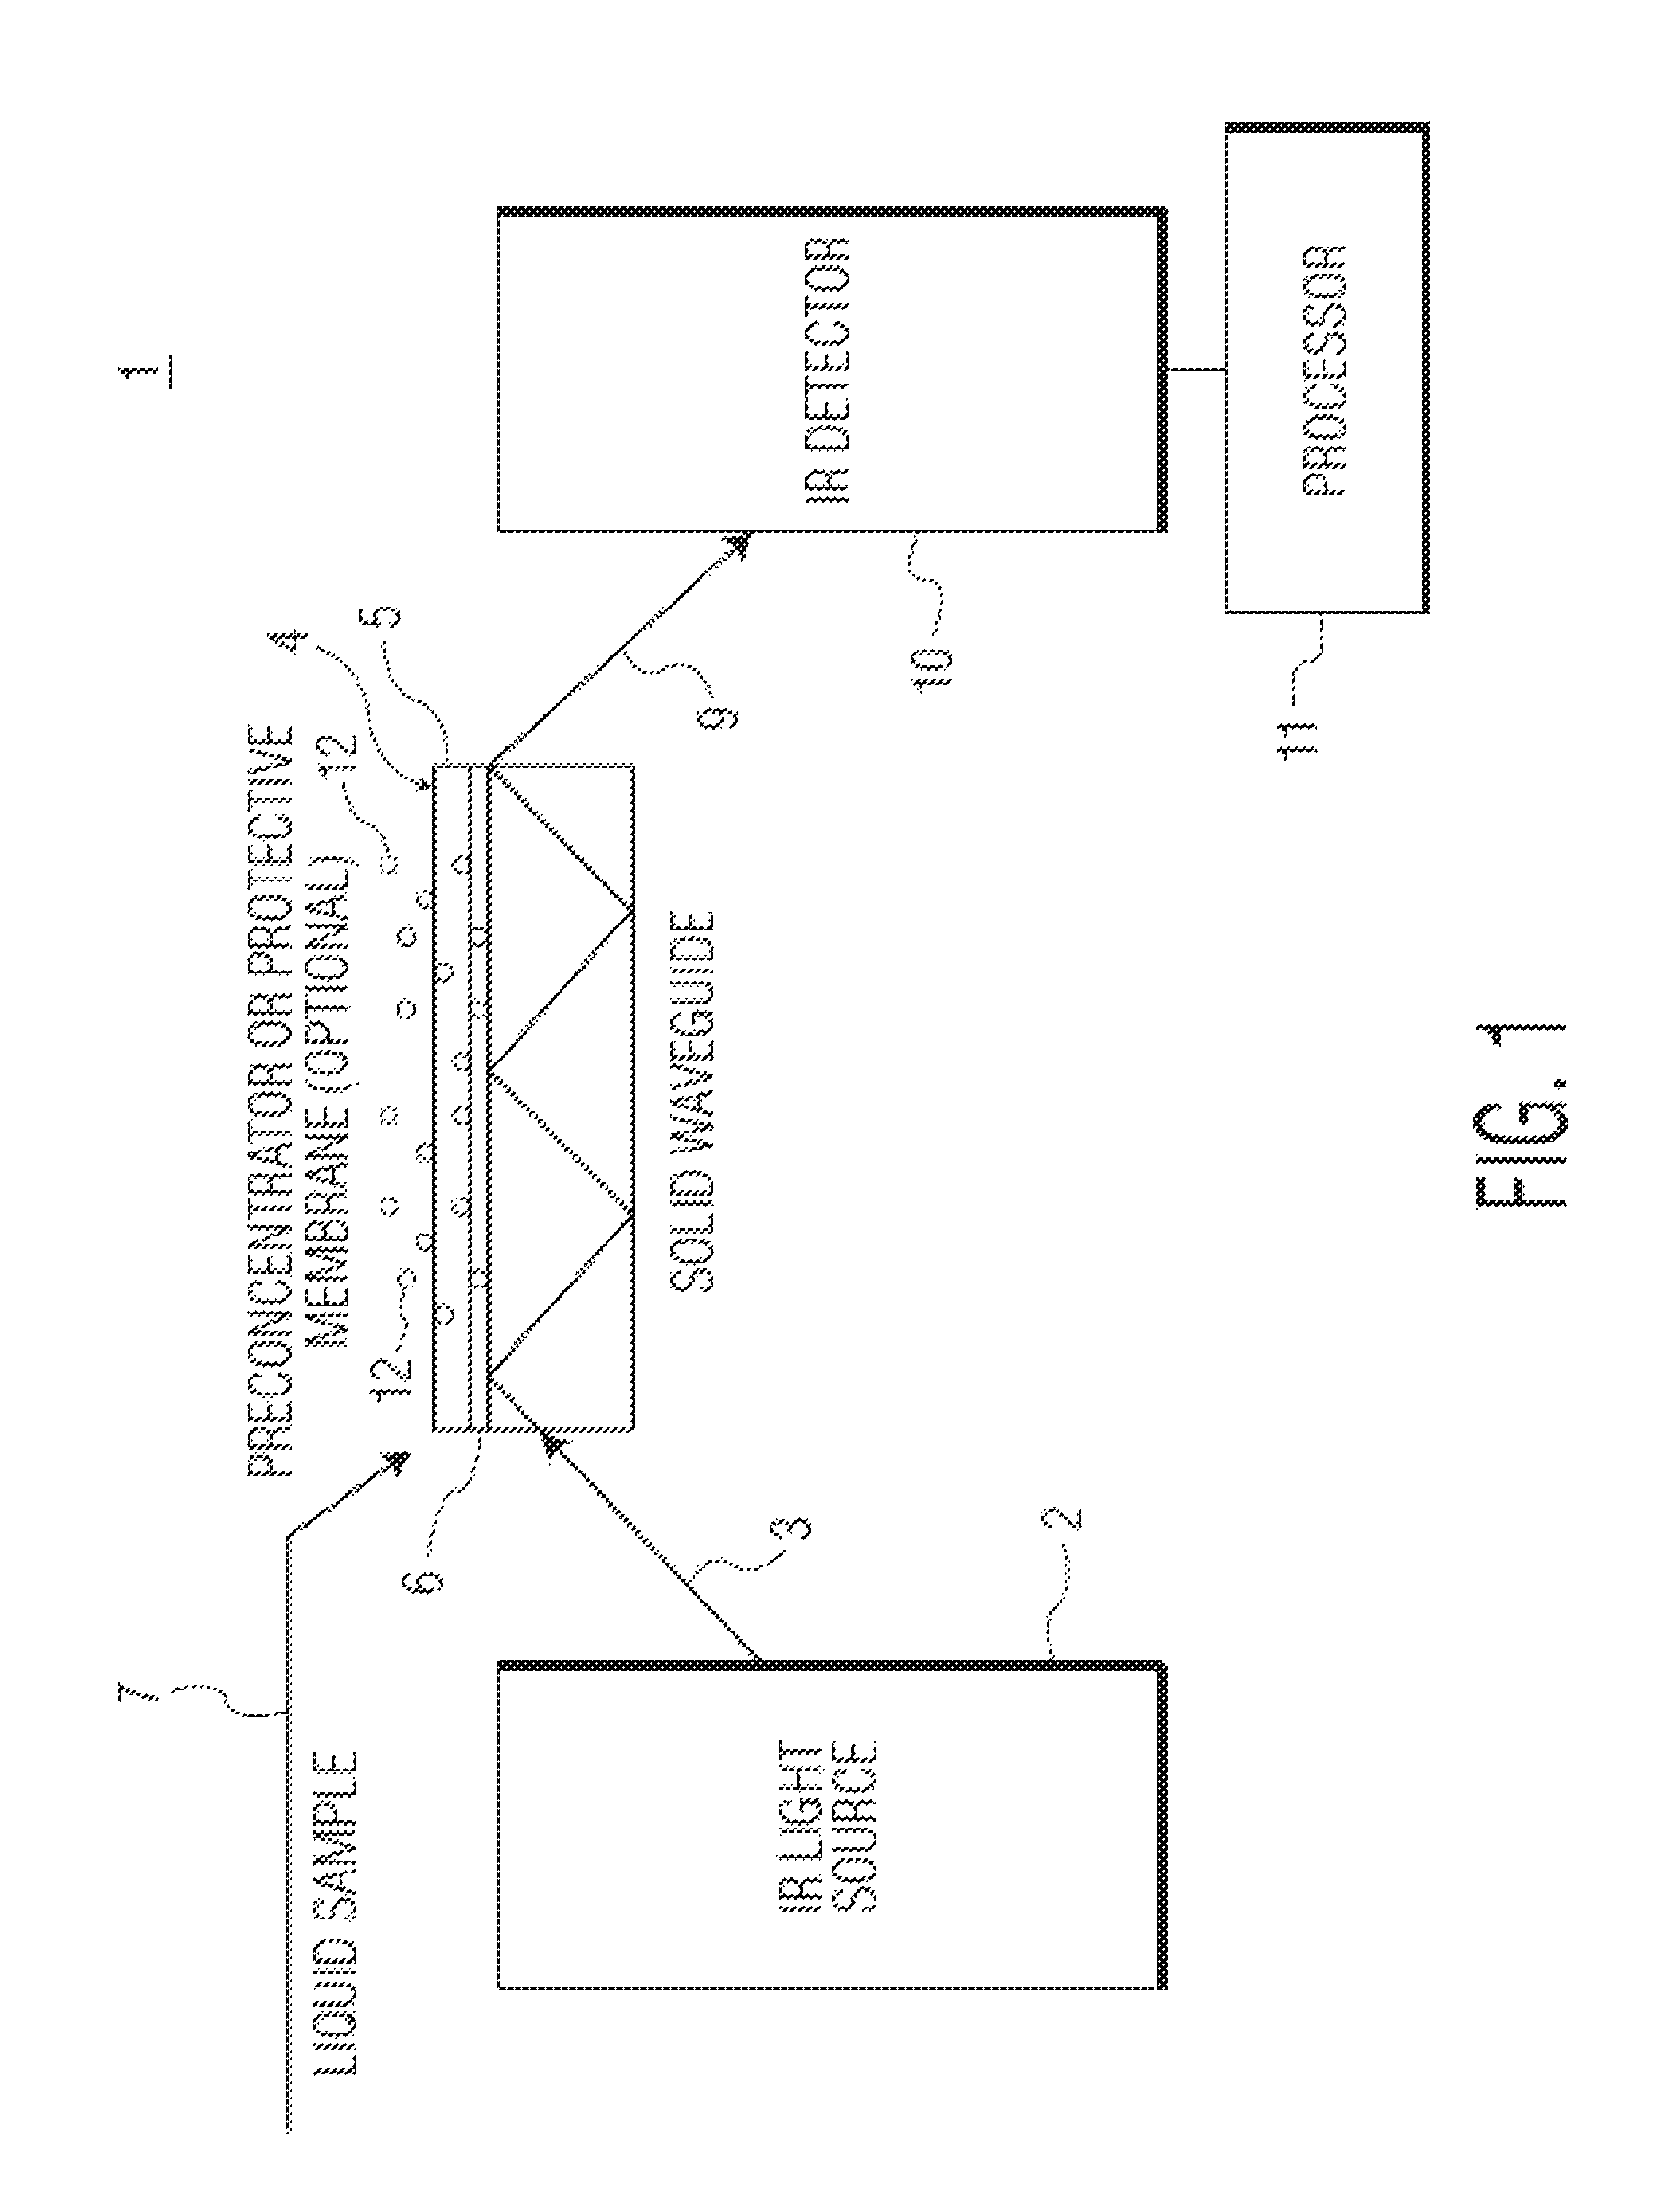 Method and apparatus for a mid-infrared (MIR) system for real time detection of petroleum in colloidal suspensions of sediments and drilling muds during drilling operations, logging and production operations